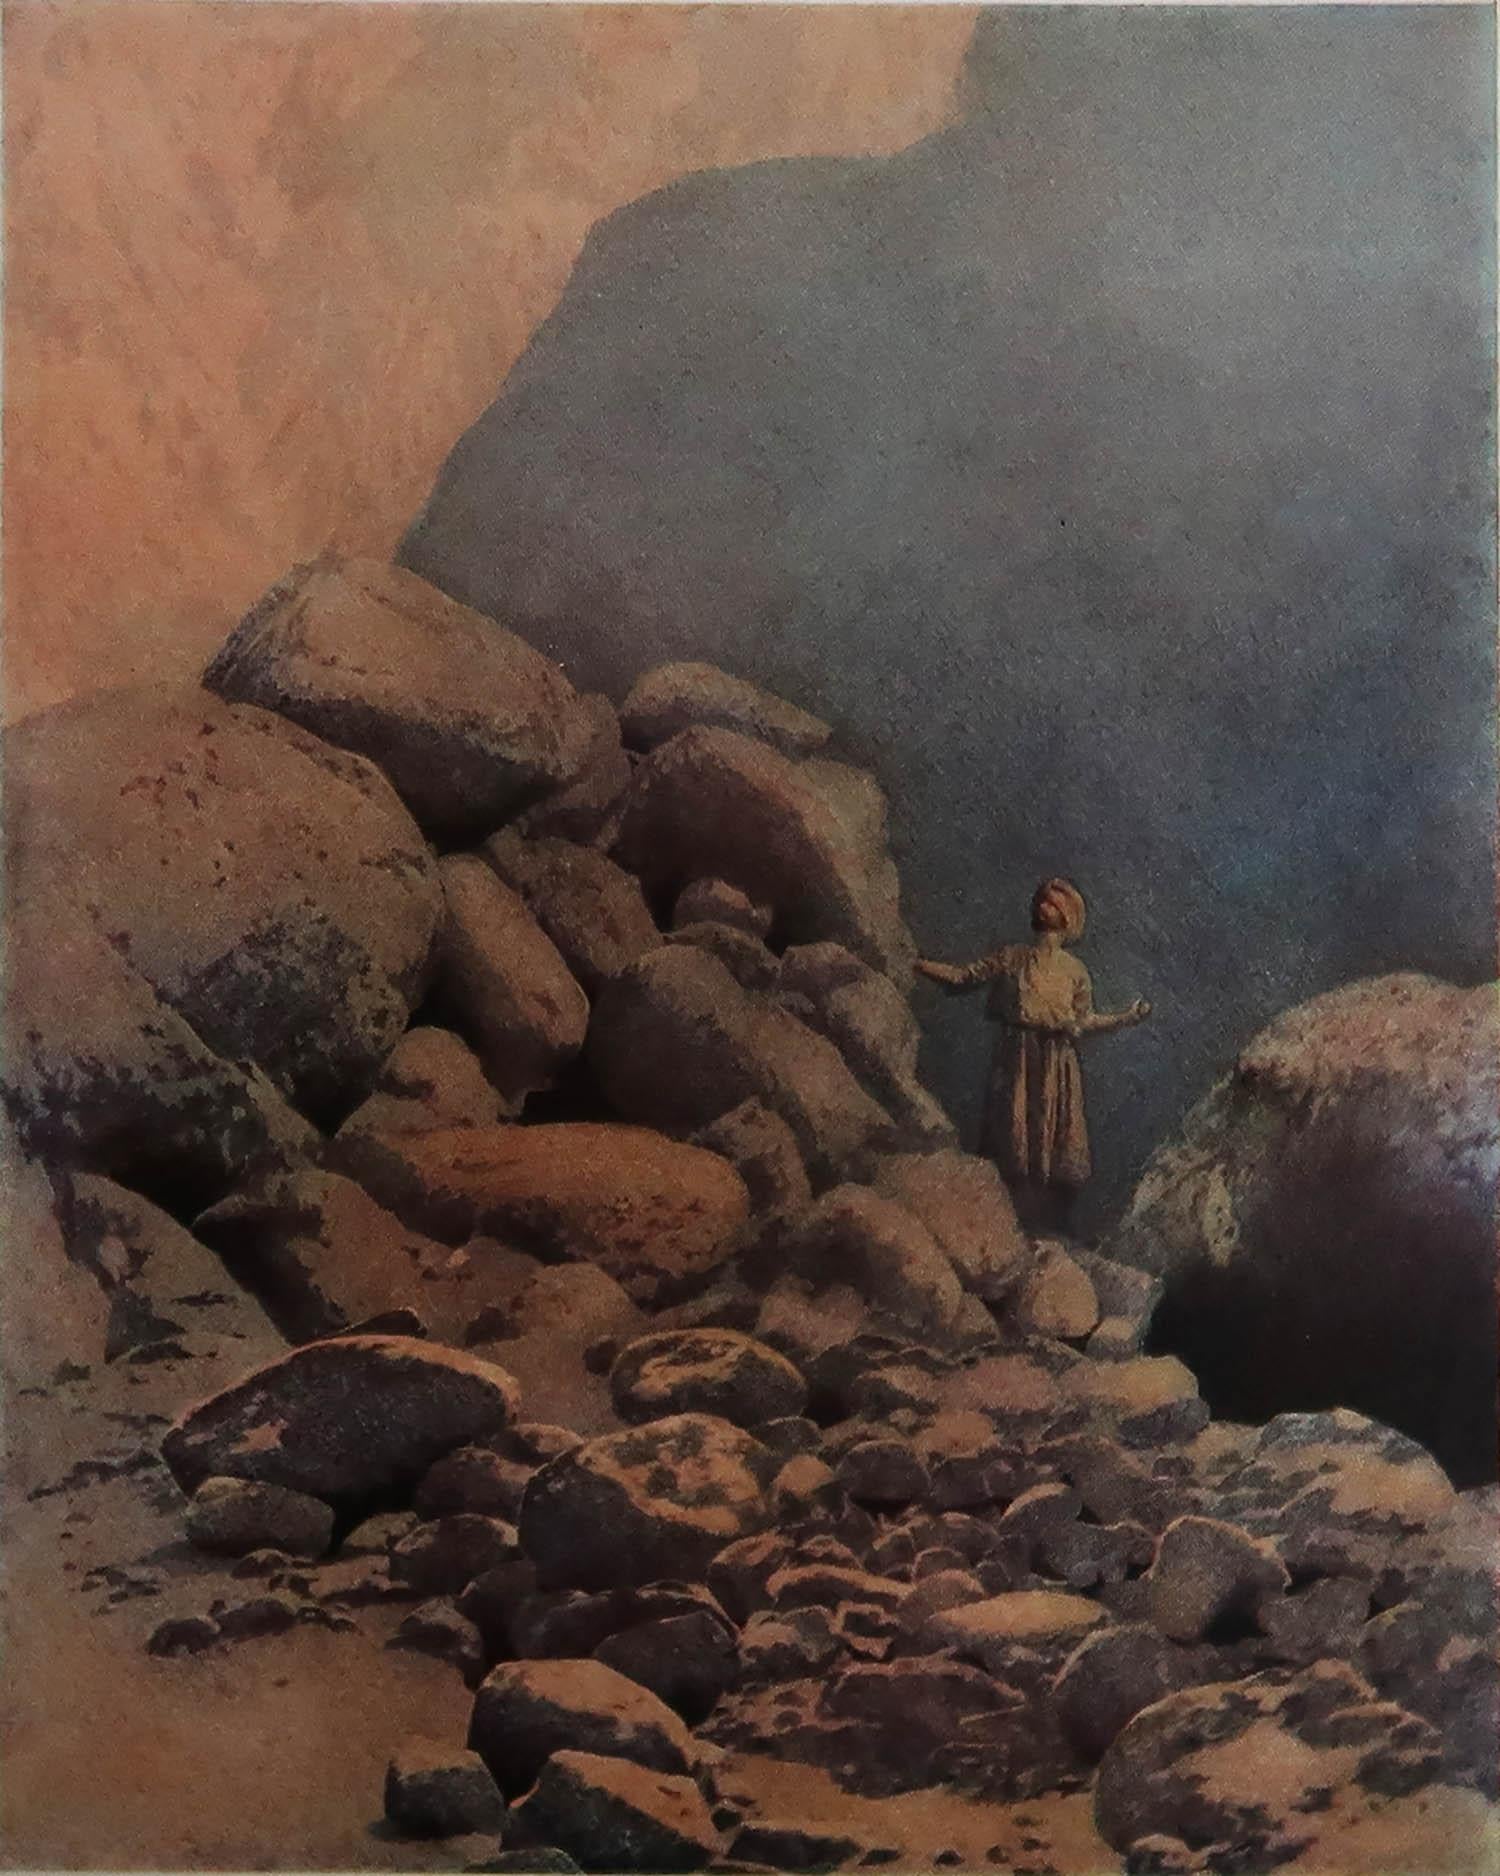 Amazing image by Maxfield Parrish

Lithograph. 

Originally a plate from 